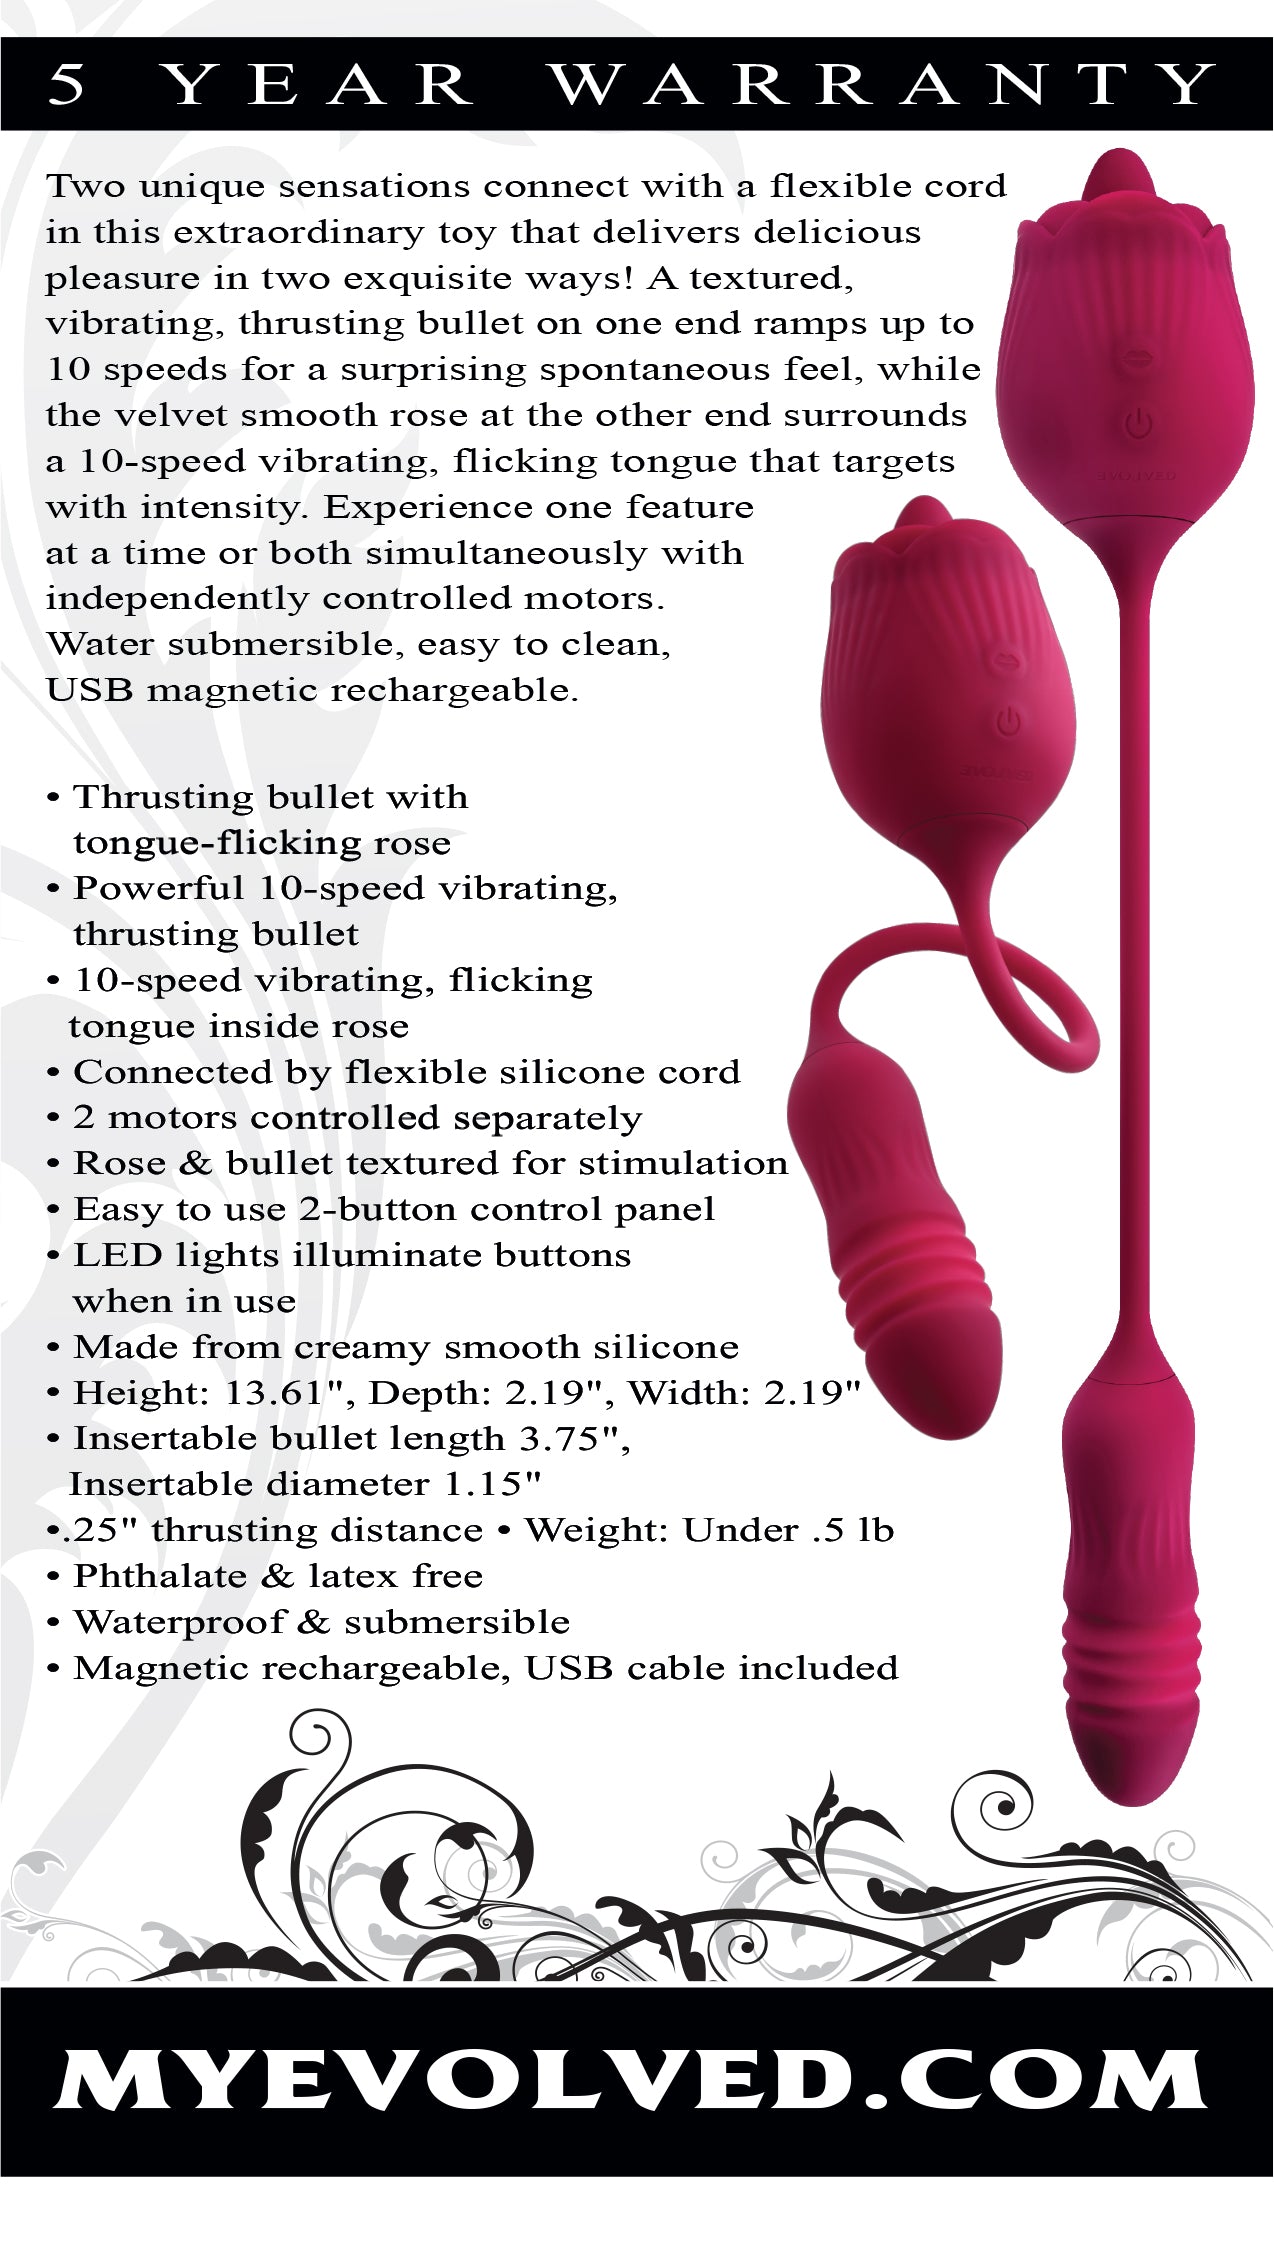 Back of the box of the Wild Rose Rechargeable Silicone Clitoral Stimulator from Evolved.